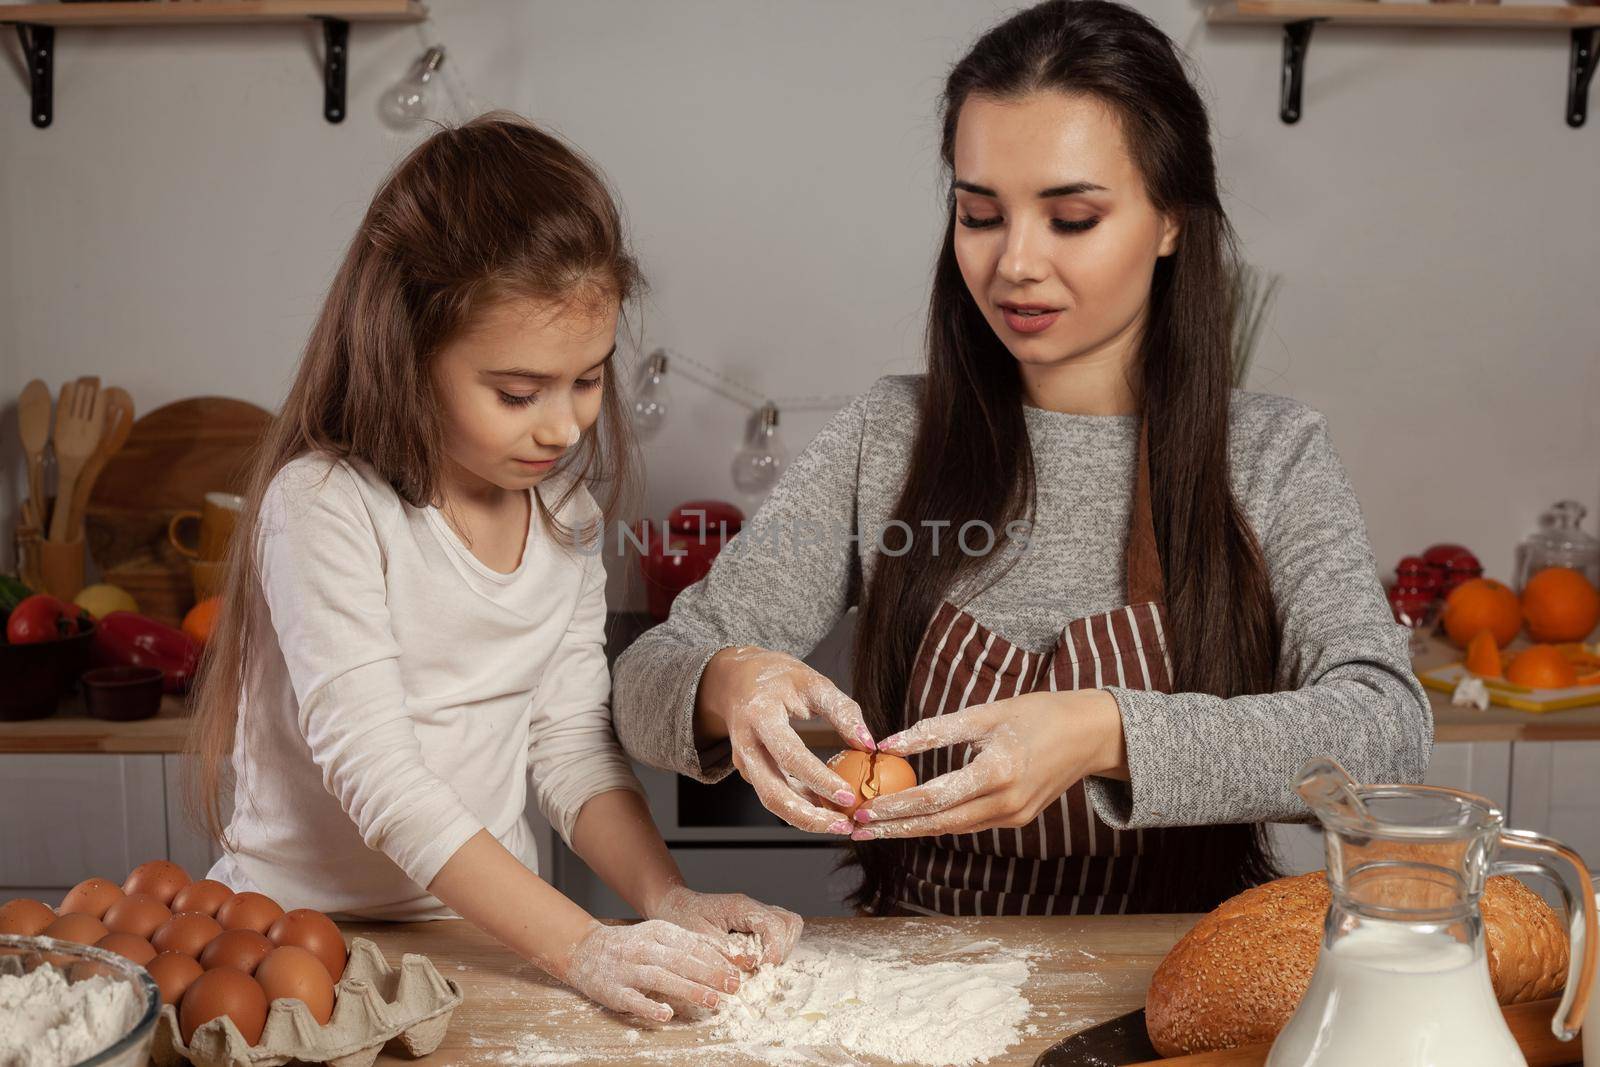 Happy loving family are preparing pastries together. Cute mommy and her little girl are adding an egg to the dough and having fun at the kitchen, against a white wall with shelves and bulbs on it. Homemade food and little helper.